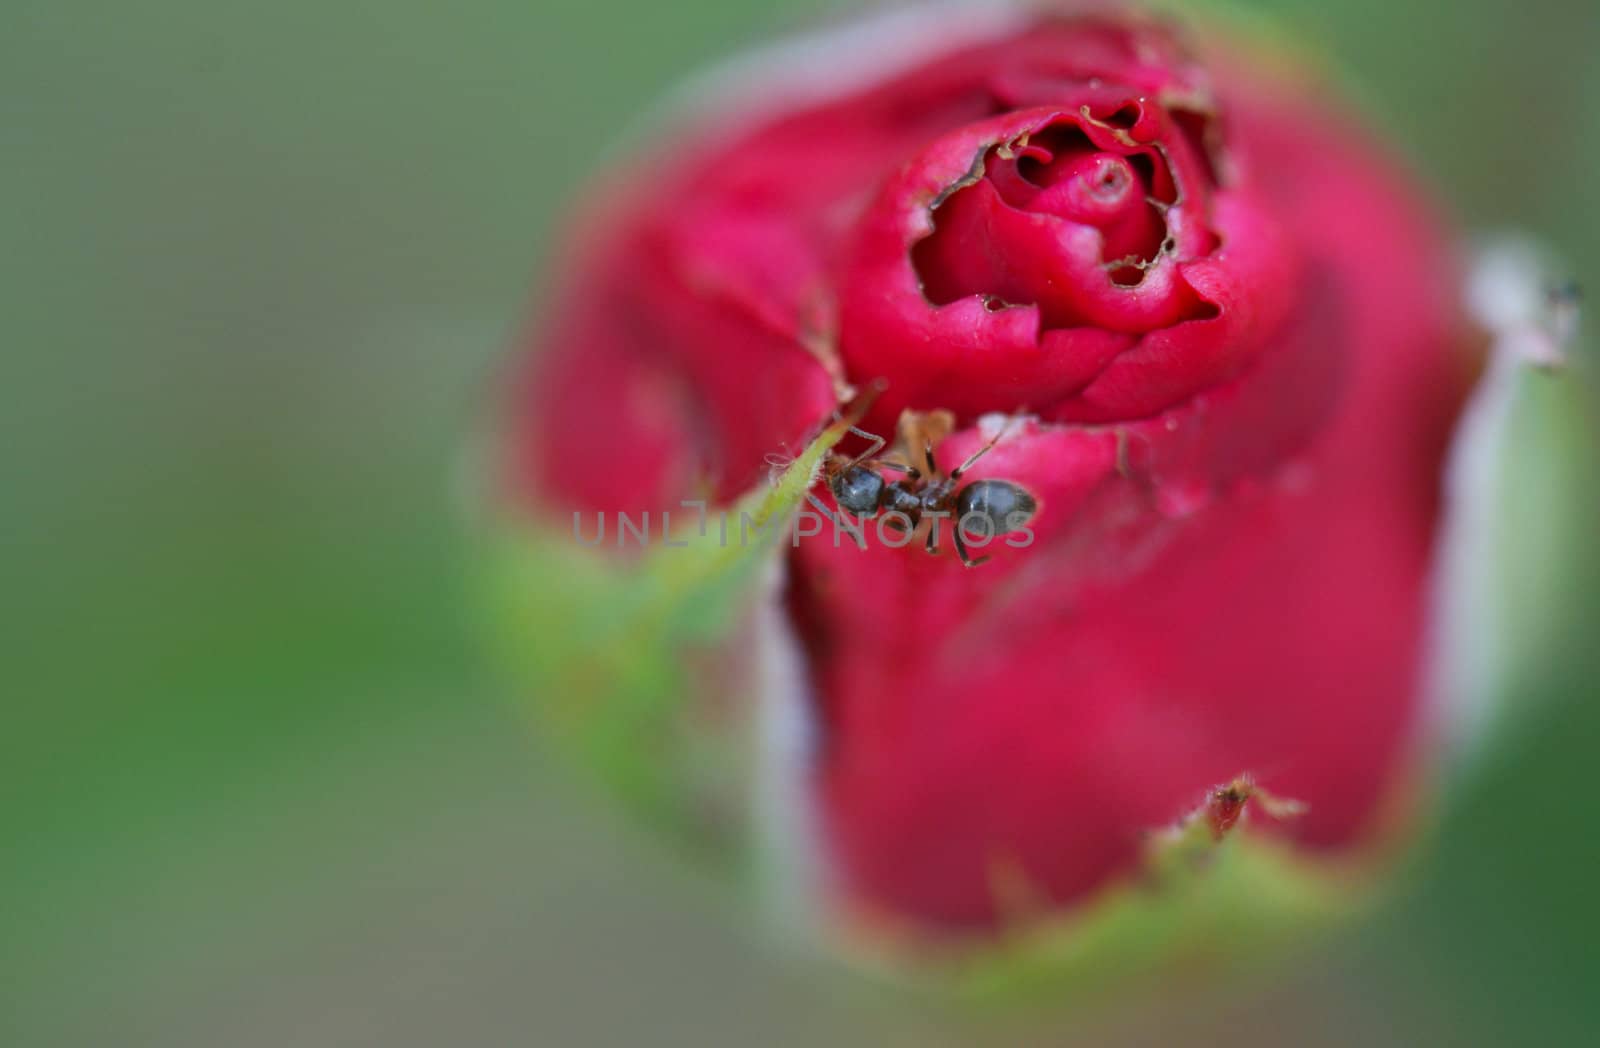 Ant on a flower by Dona203